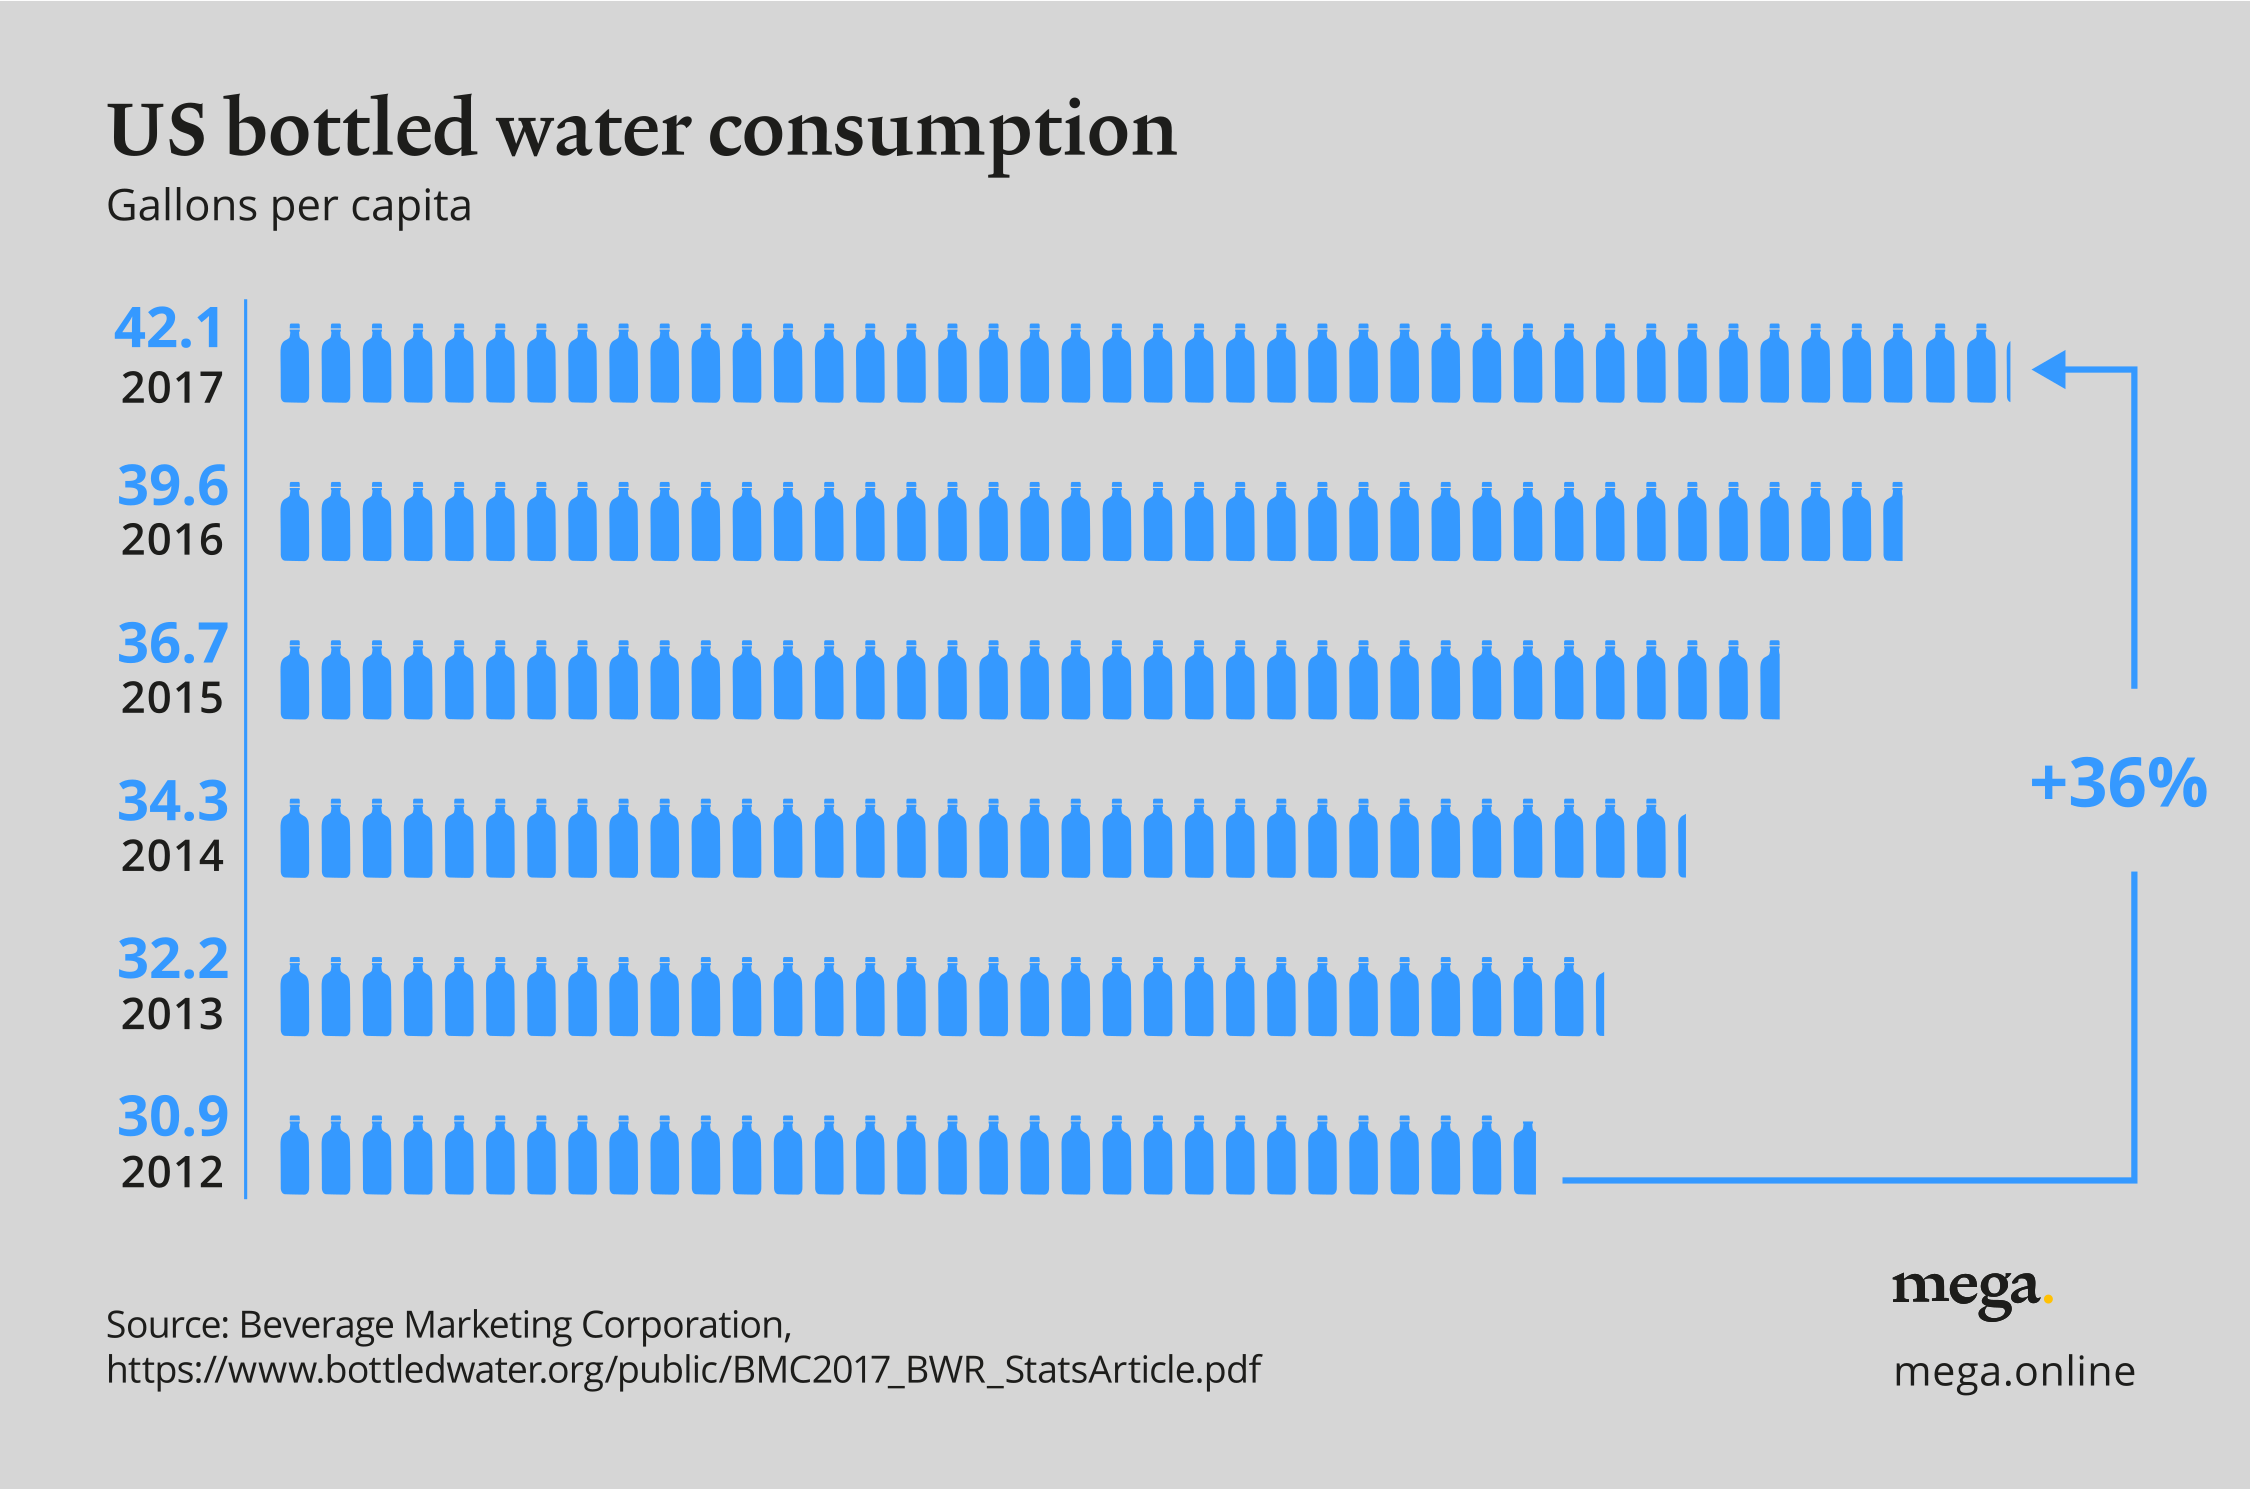 Data Shows Bottled Water Consumption Continues To Increase